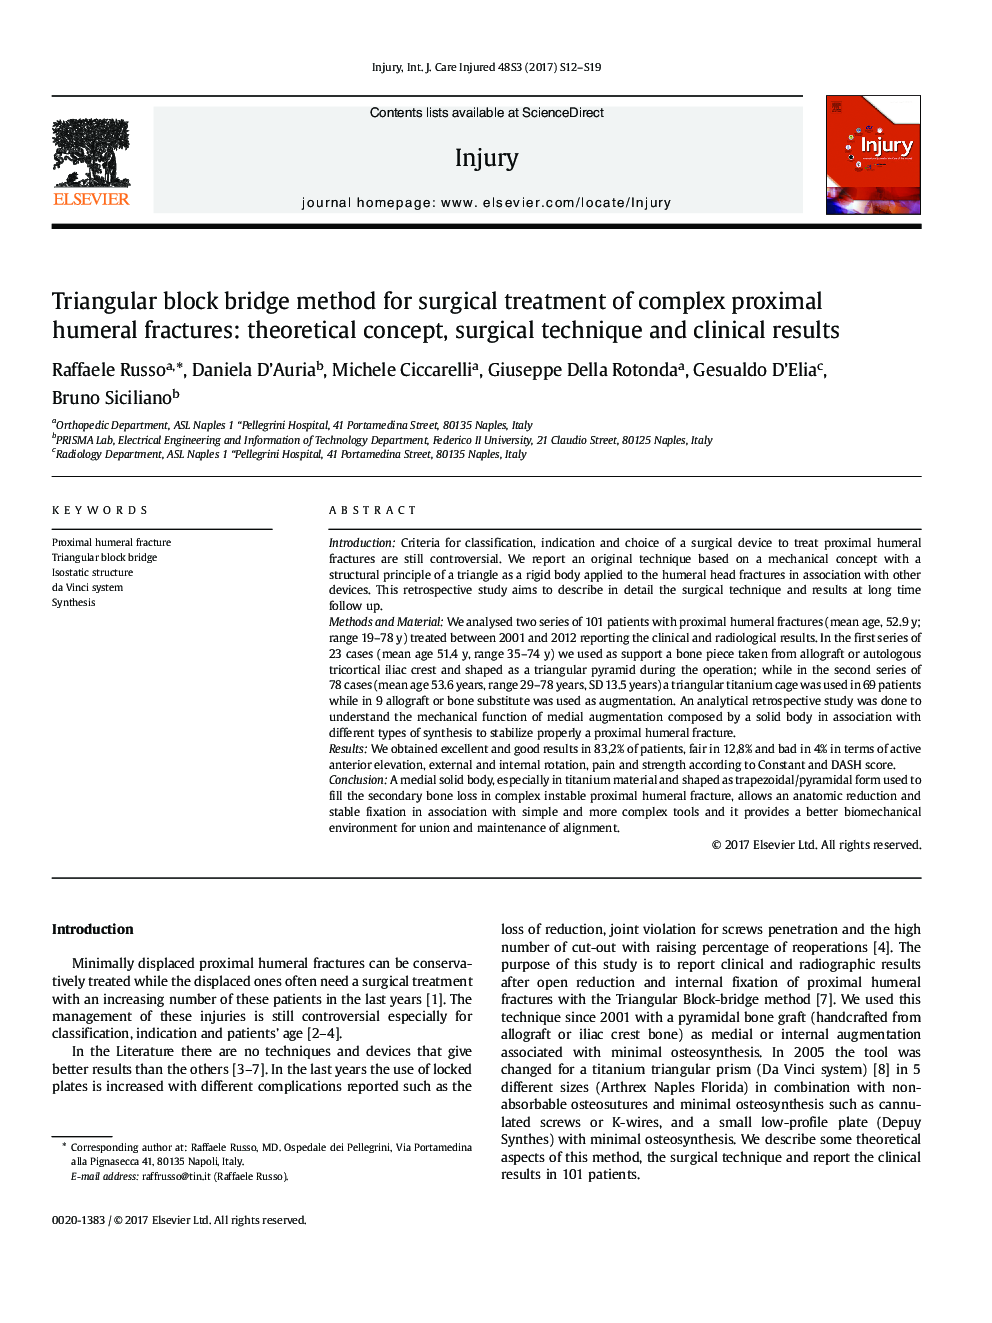 Triangular block bridge method for surgical treatment of complex proximal humeral fractures: theoretical concept, surgical technique and clinical results